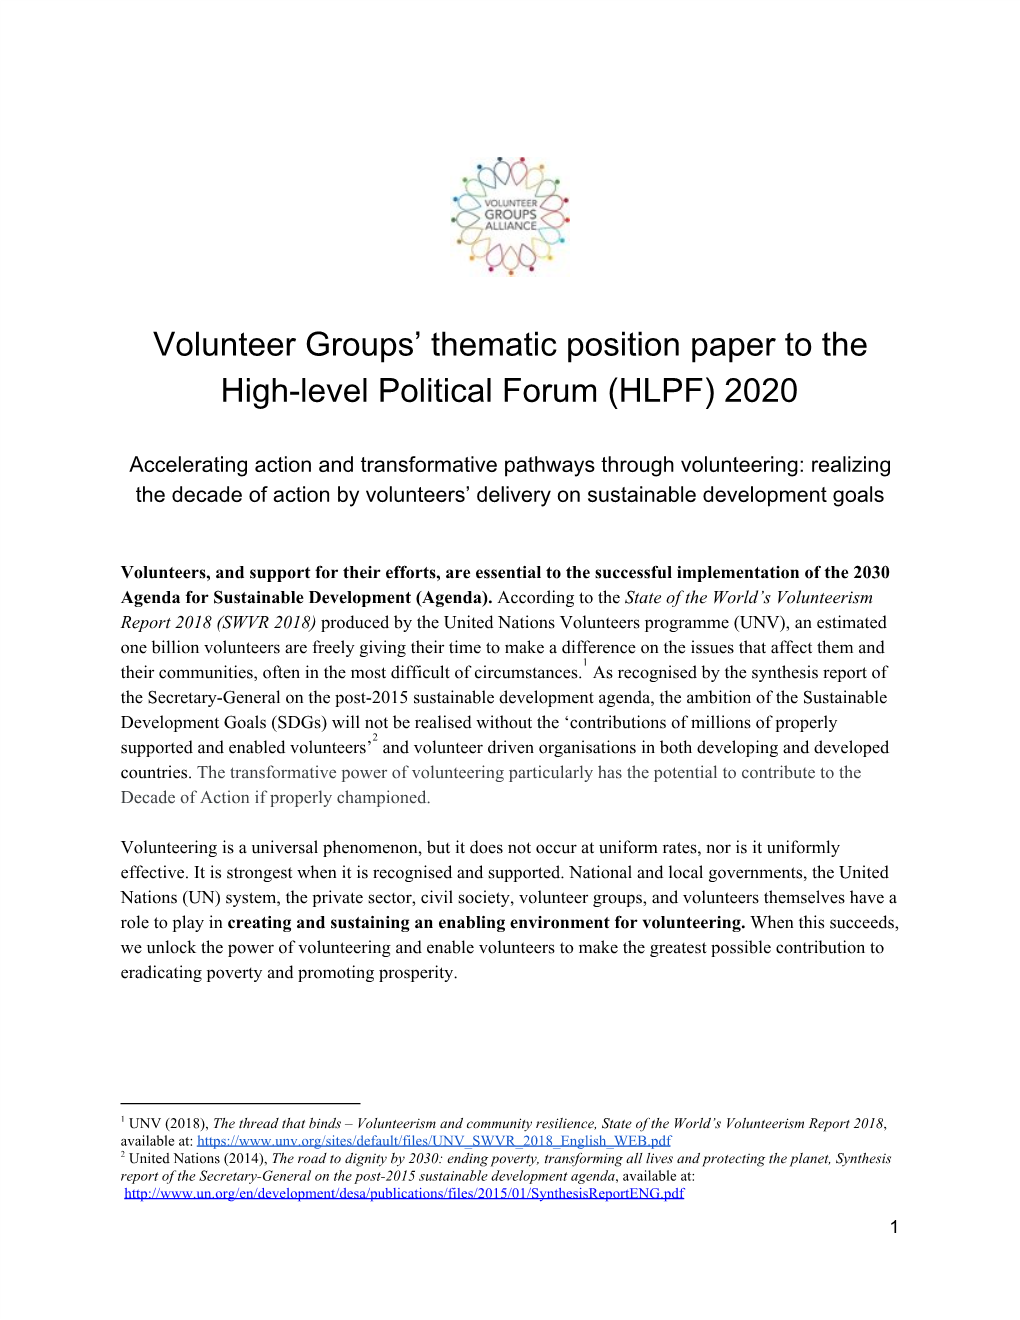 Volunteer Groups' Thematic Position Paper to the High-Level Political